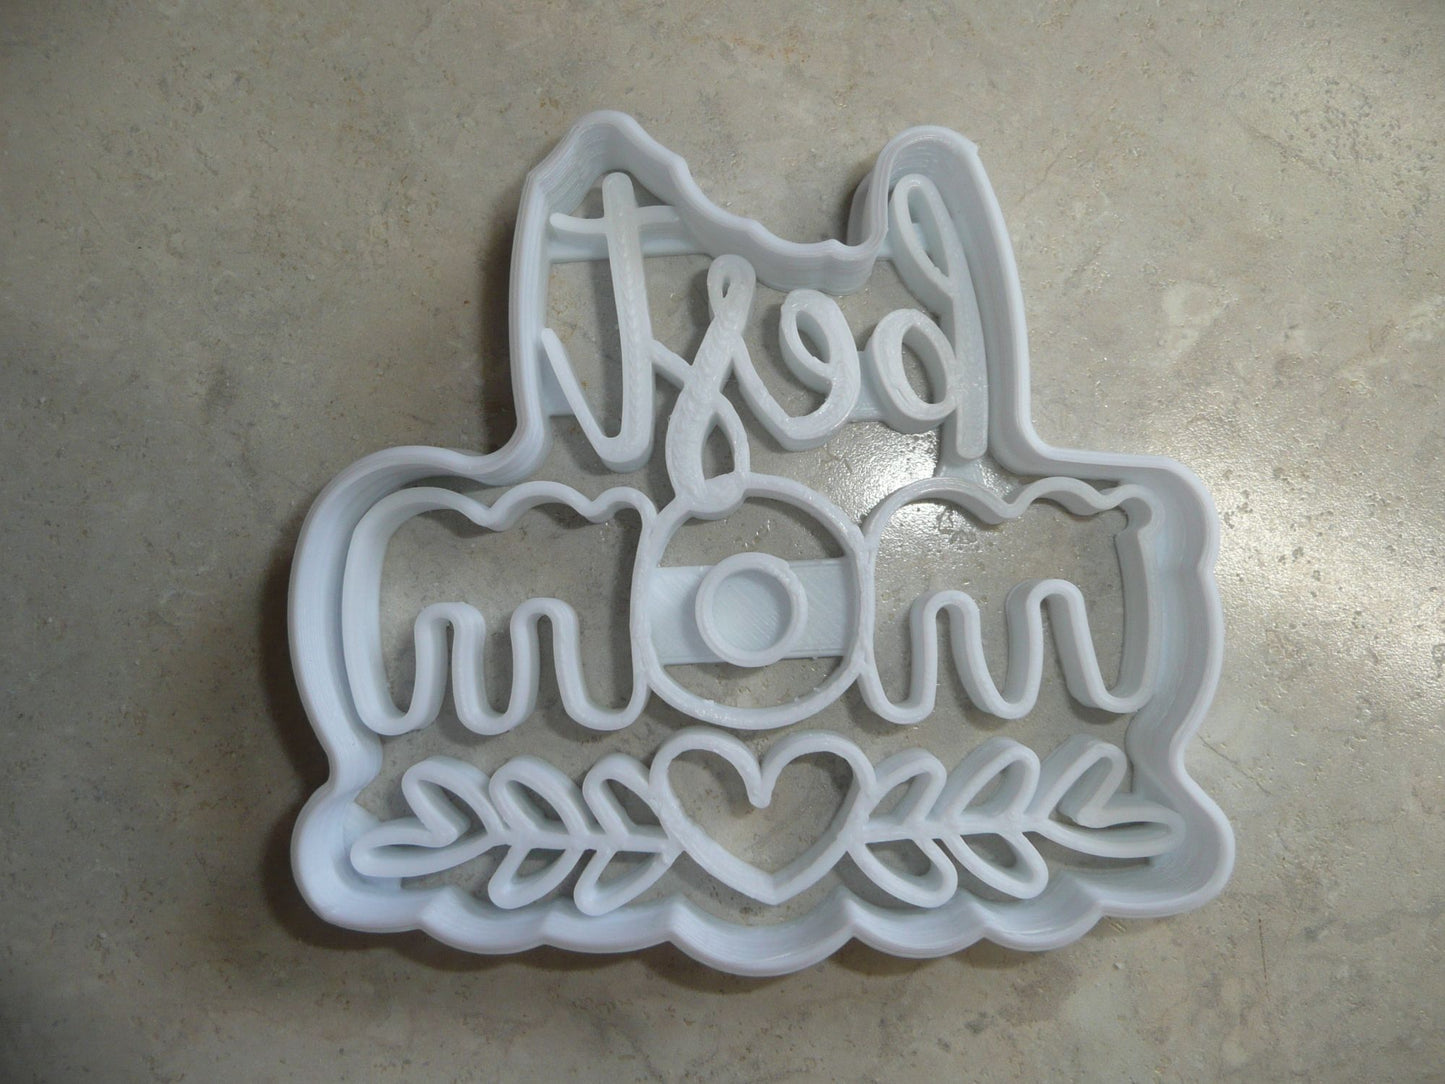 6x Best Mom With Heart Fondant Cutter Cupcake Topper Size 1.75 Inch USA FD3475